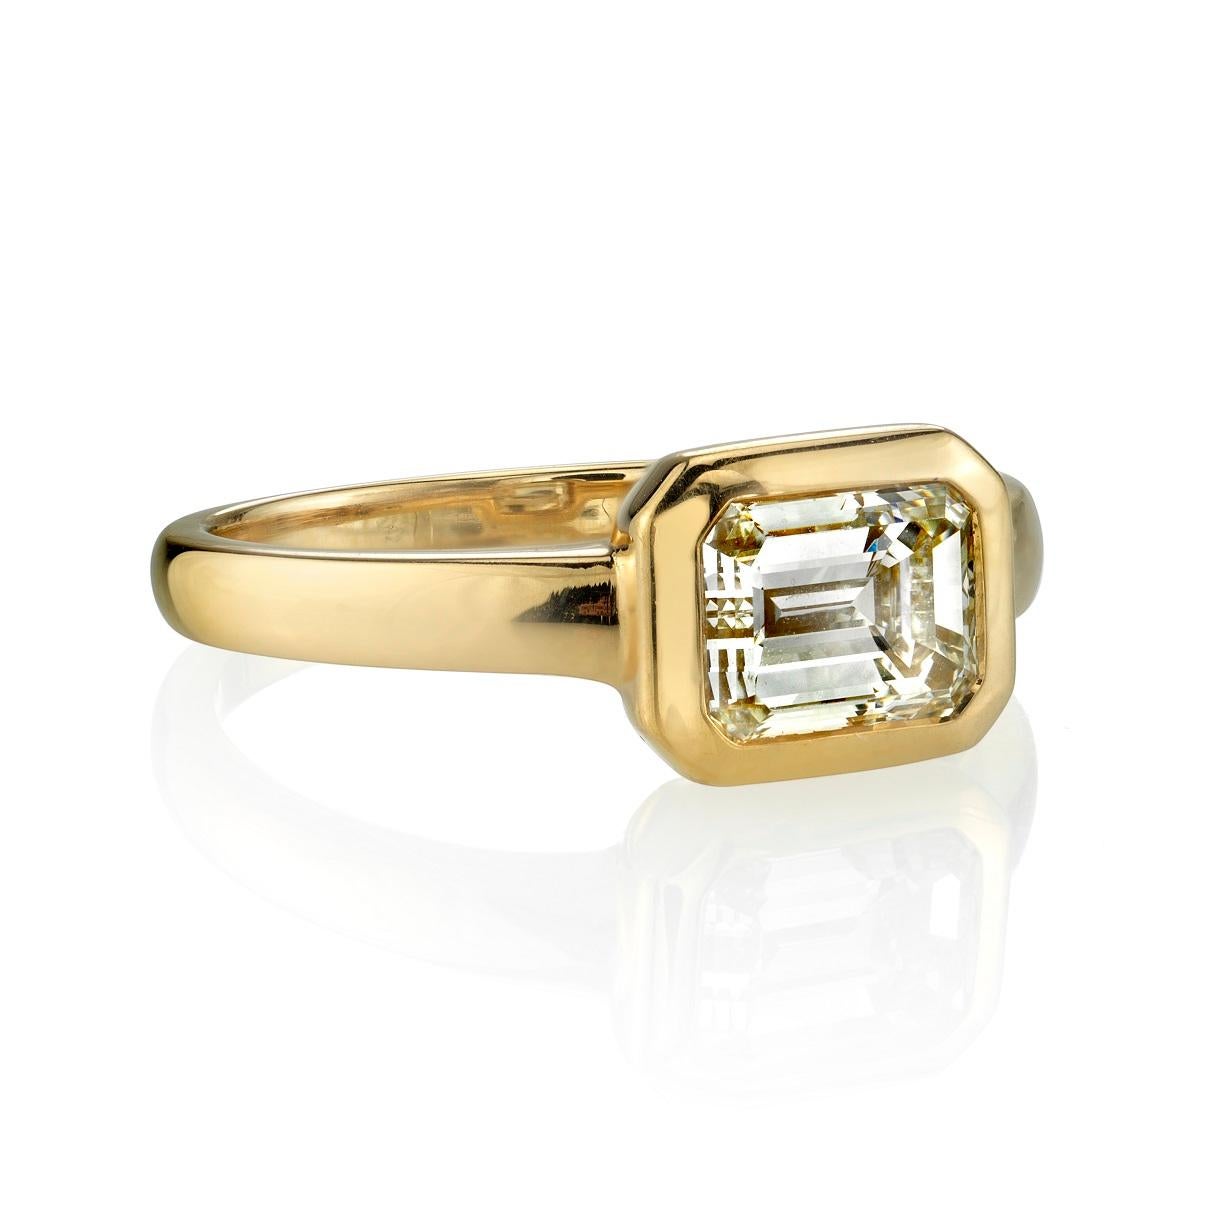 1.20ct L/VVS1 GIA certified Emerald cut diamond set in a handcrafted 18k yellow gold setting. Ring is currently a size 6 and can be sized to fit. 